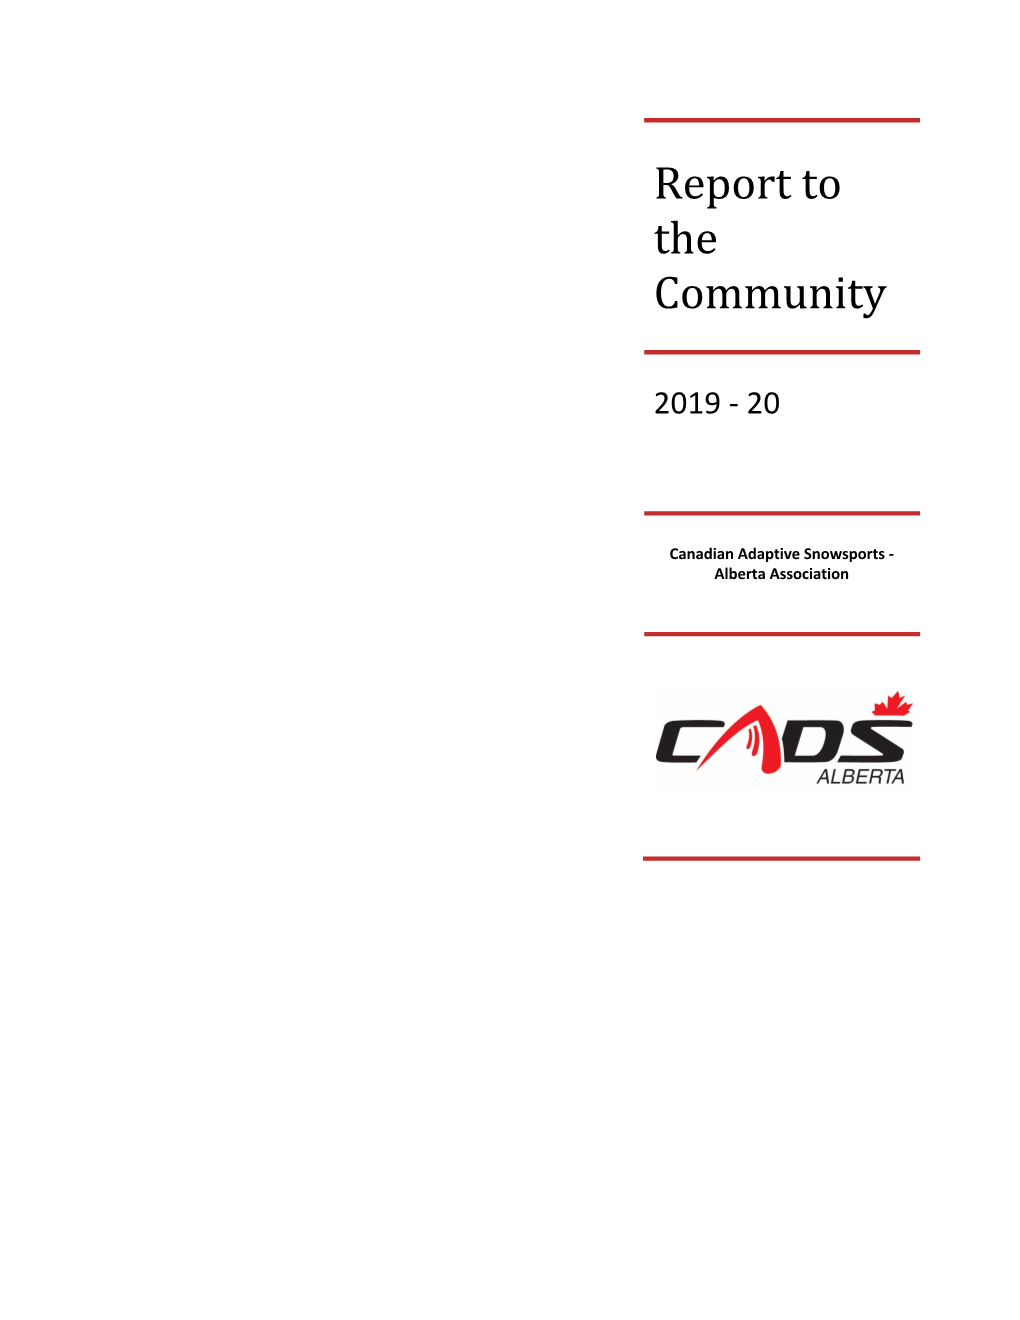 Report to the Community 2019-20 Final